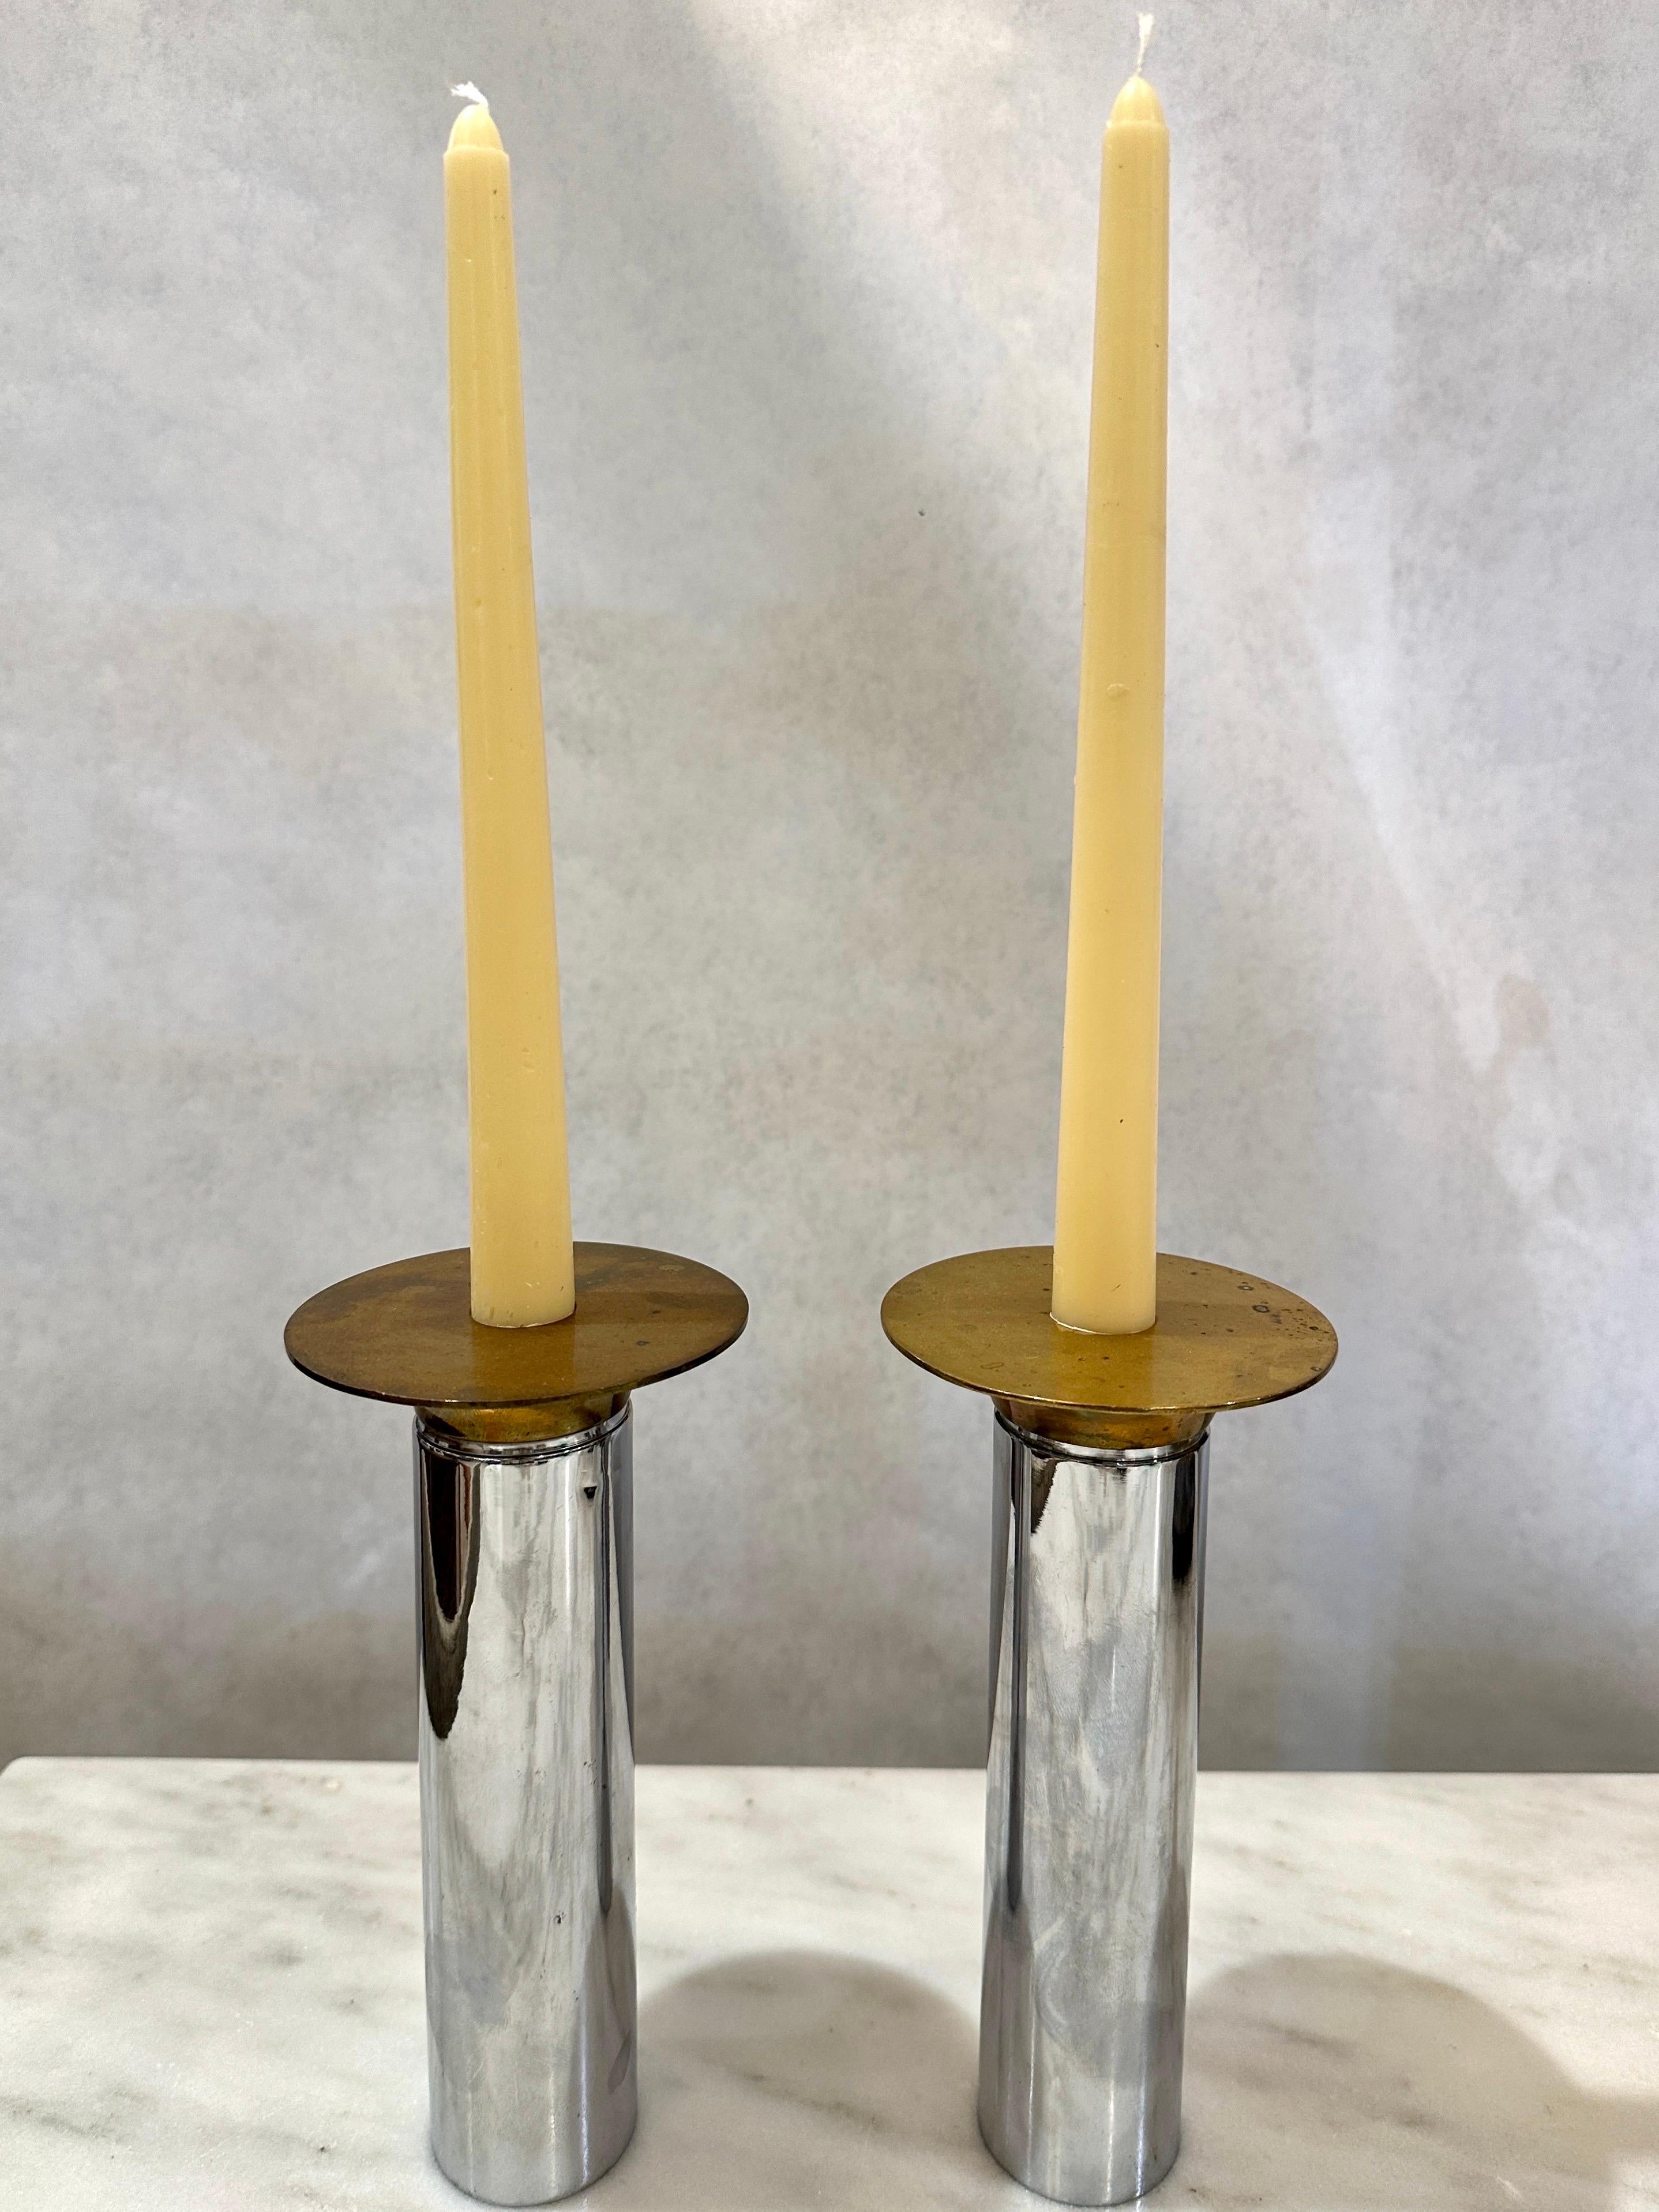 EXTRA Rare Pair of Torben Ørskov candle holders in mixed-metals (patinaed brass and nickel).  The candle holders are designed by Danish designer, Torben Ørskov In solid brass and nickel.  This model is not a very common model and only one candle